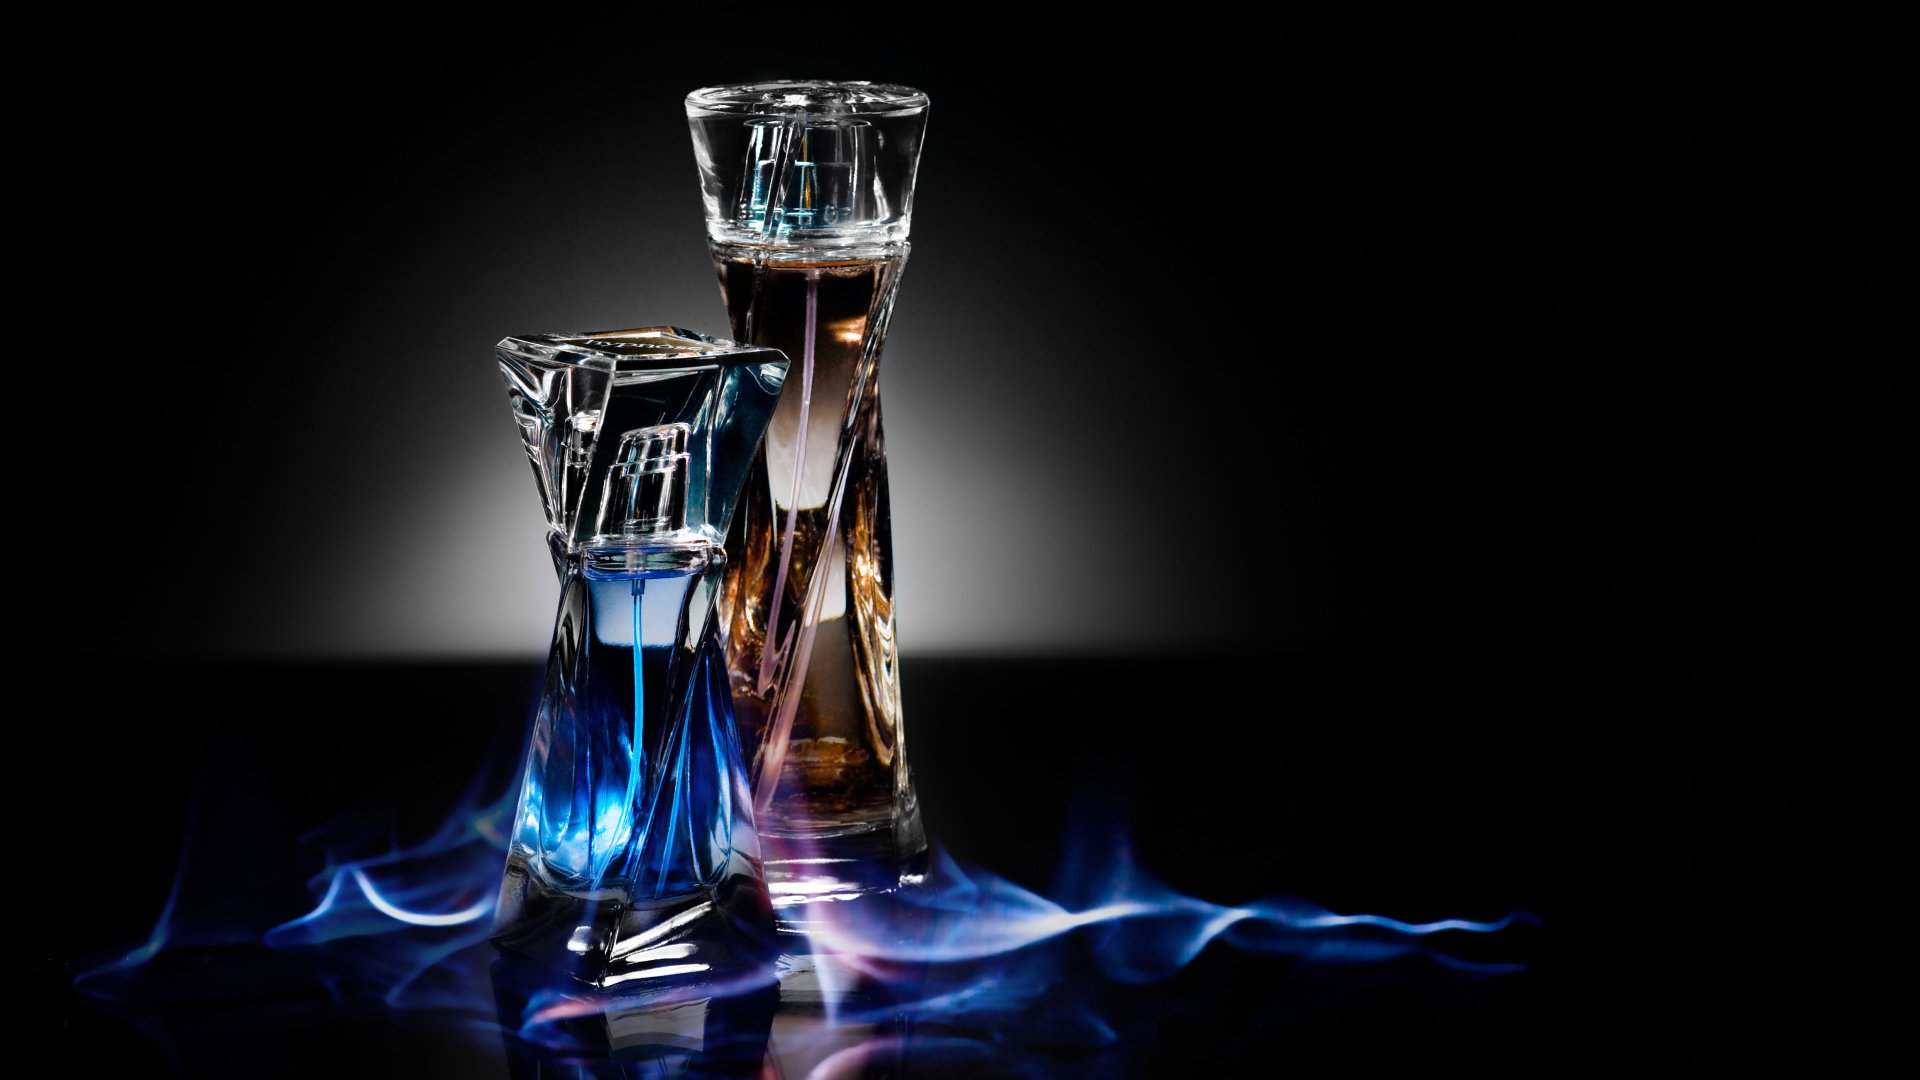 21 Perfume Hd Wallpapers Background Images Wallpaper Abyss